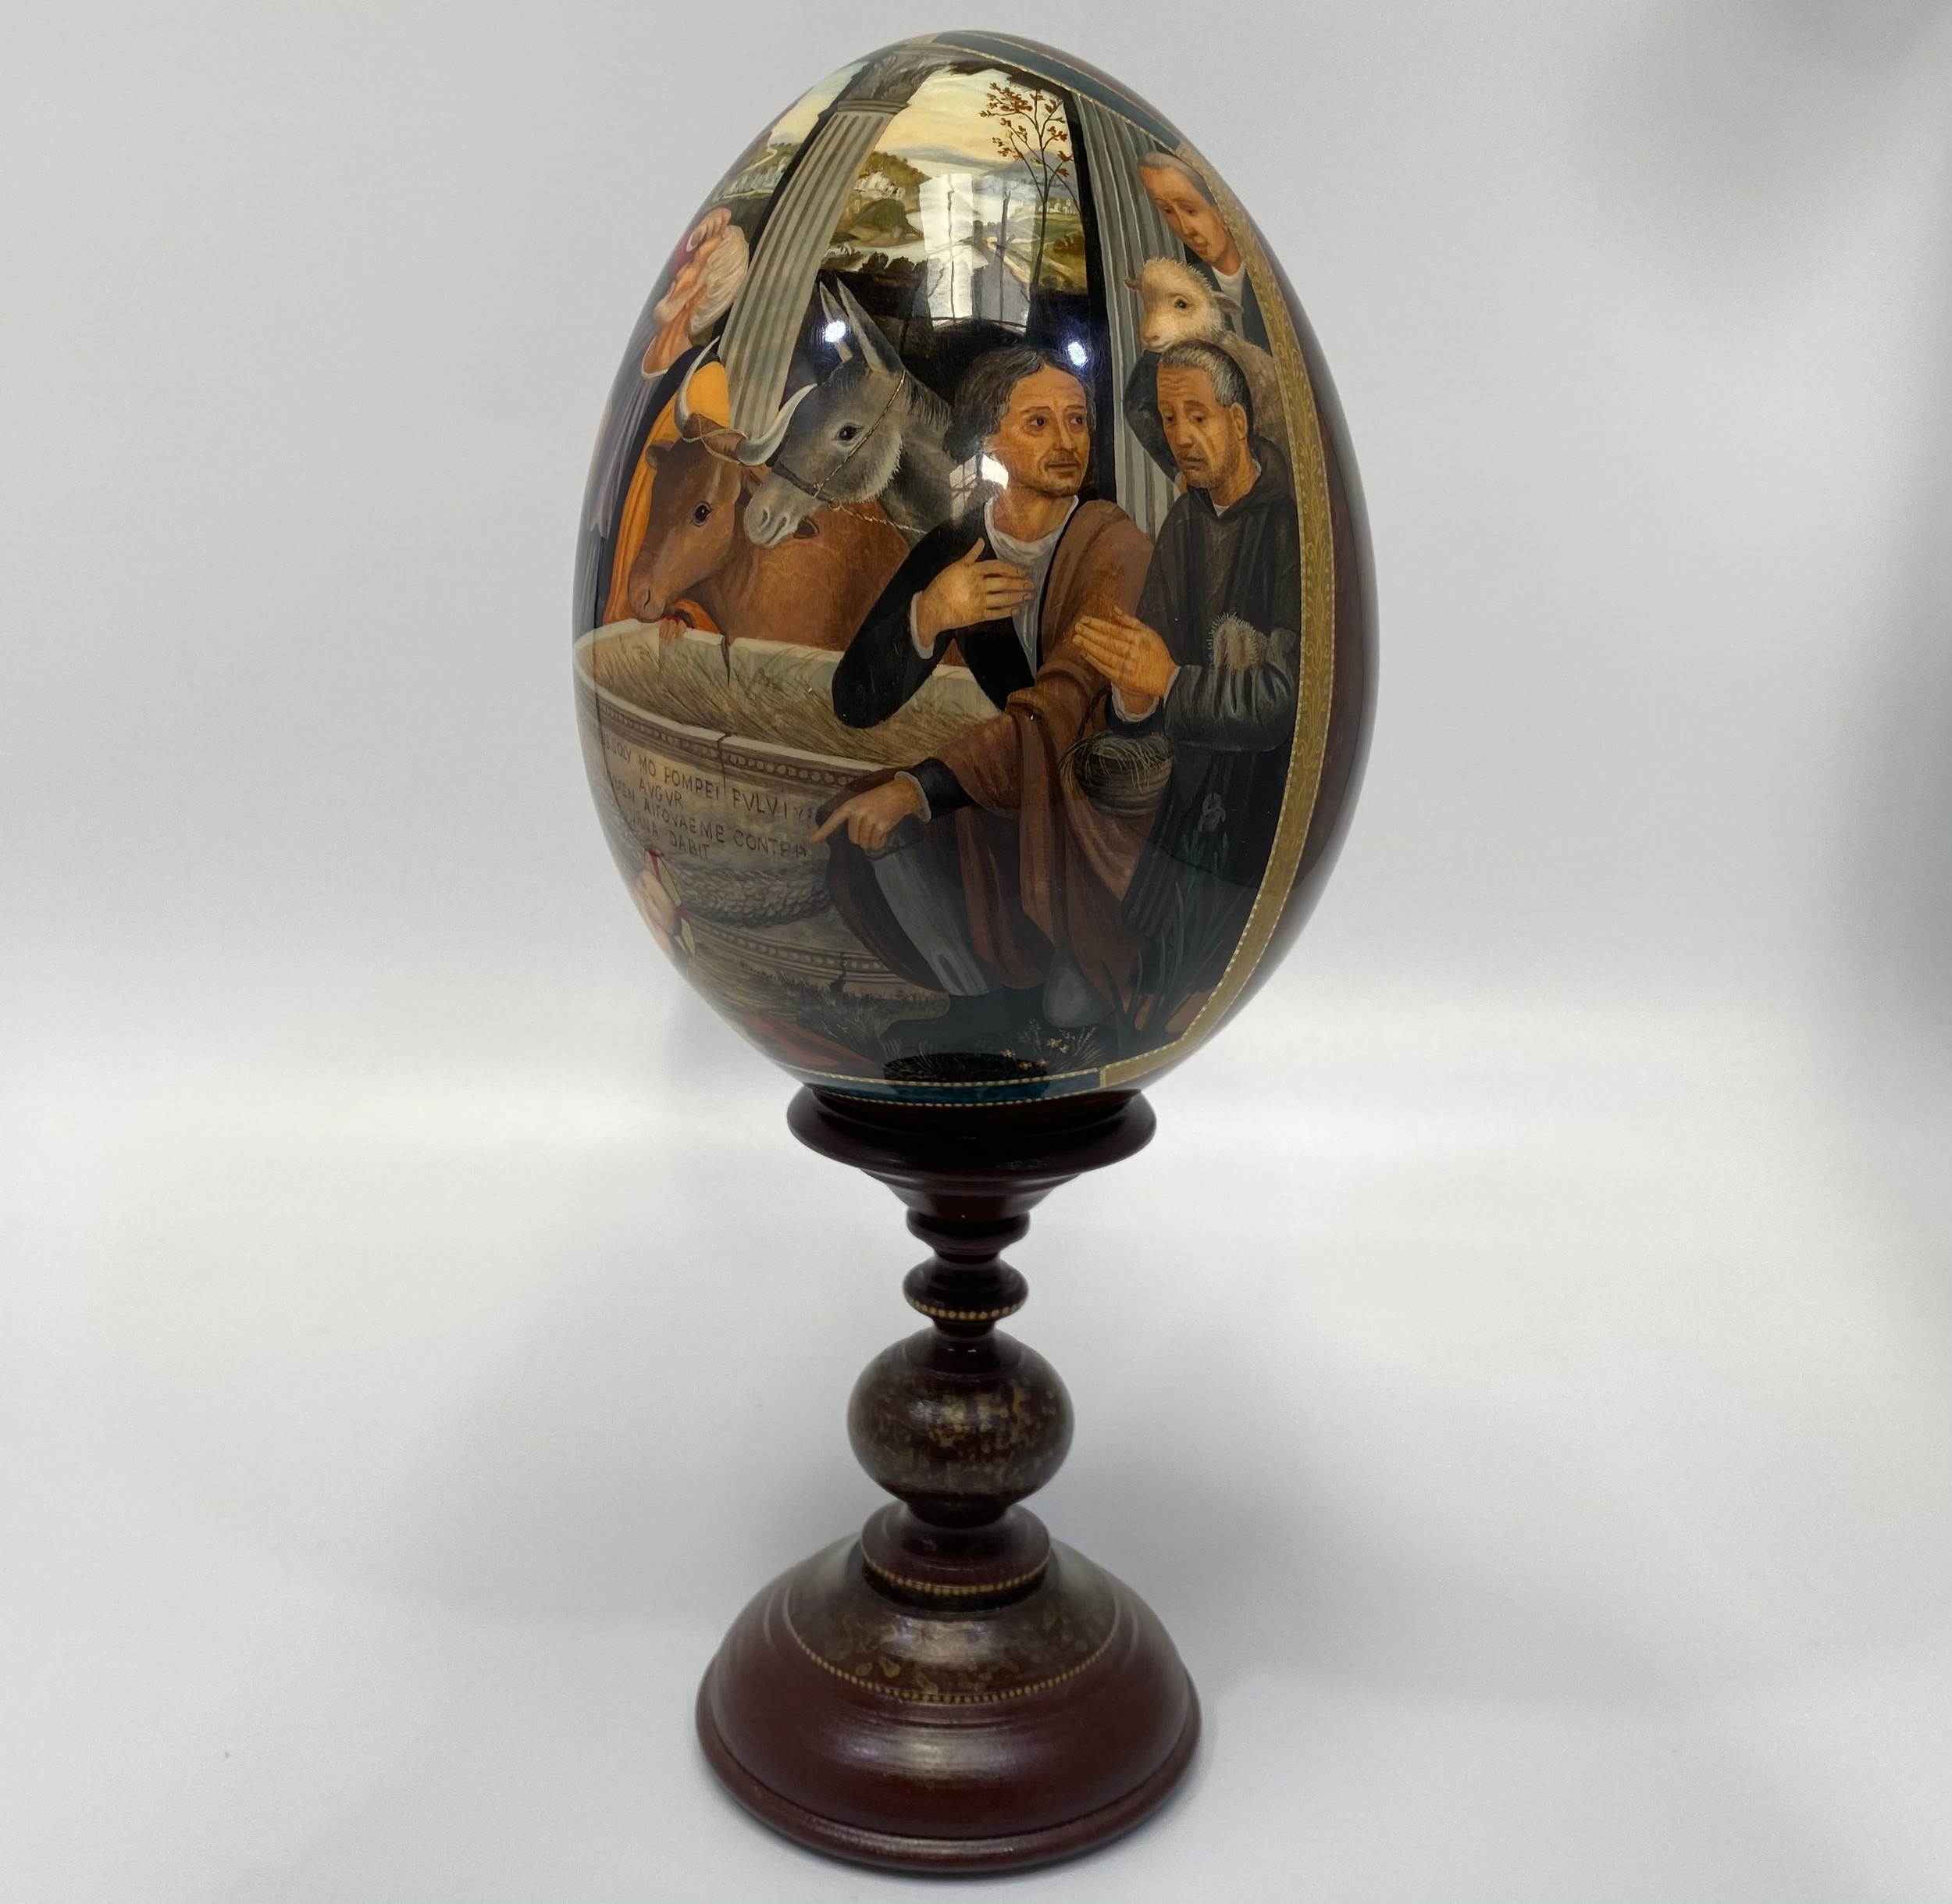 A St Petersburg hand-painted and laquered papier-mache egg depicting the Adoration of the Magi, - Image 3 of 5